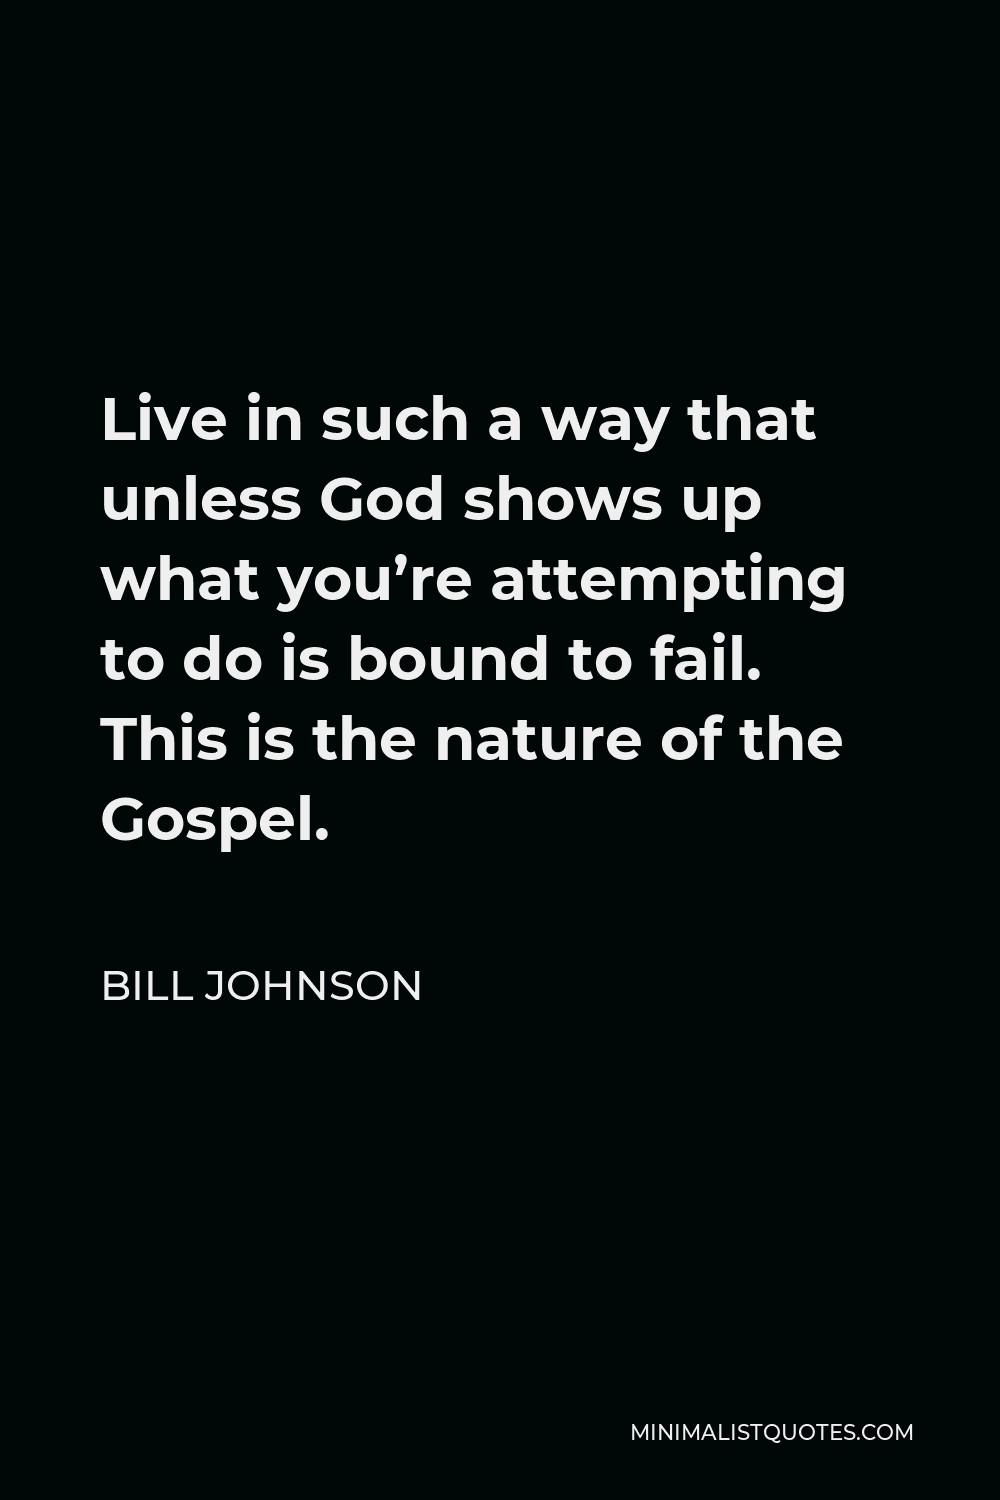 Bill Johnson Quote - Live in such a way that unless God shows up what you’re attempting to do is bound to fail. This is the nature of the Gospel.